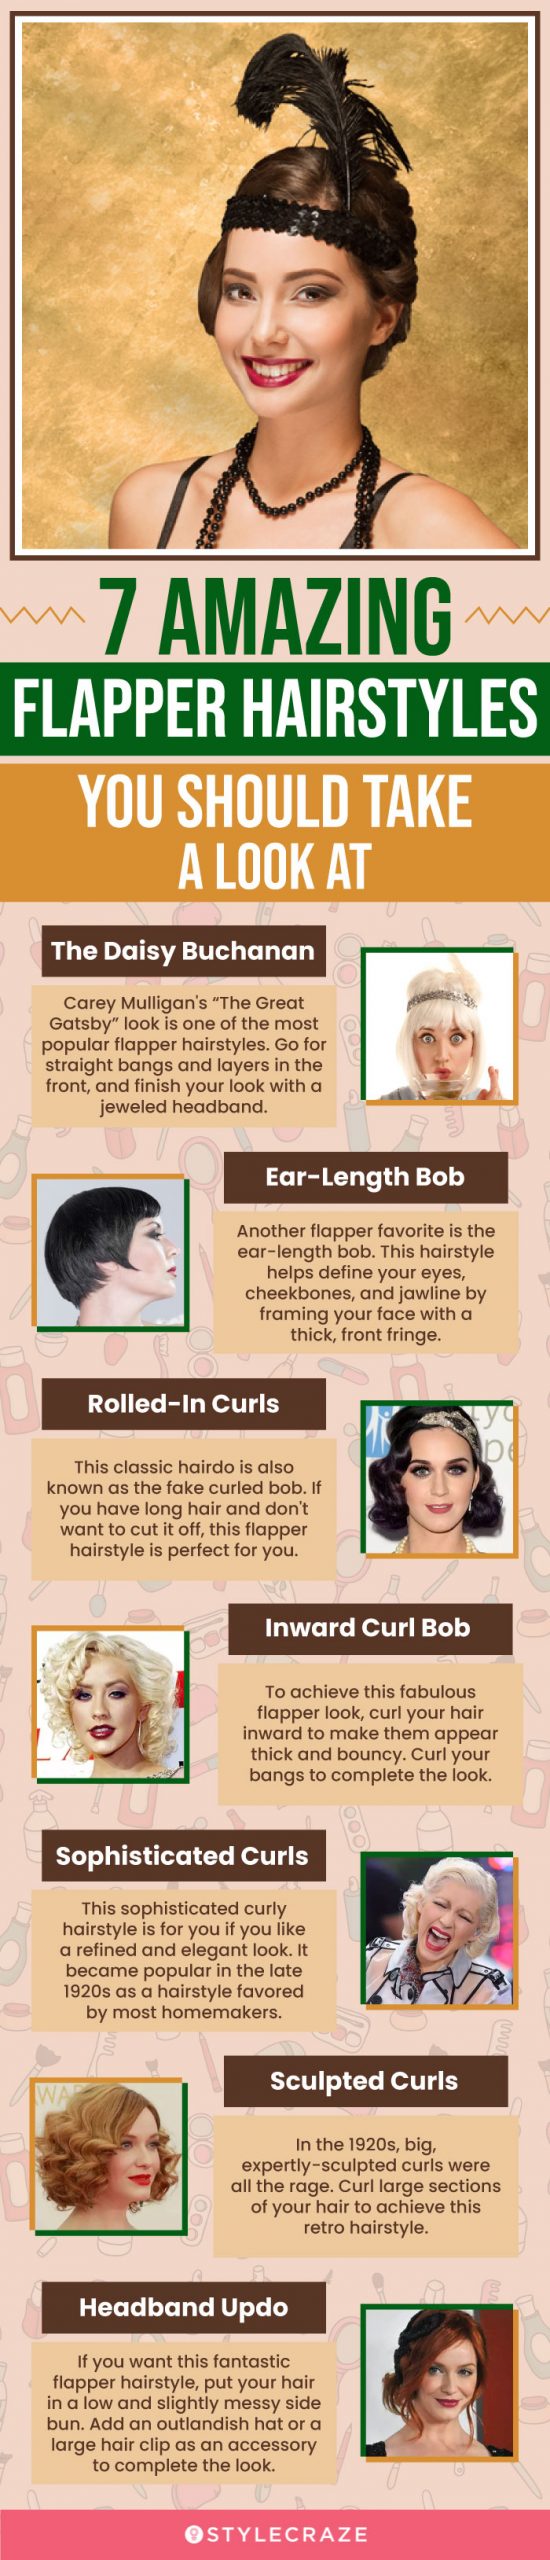 The 55 Coolest Short Haircuts for Women 2023  Glamour